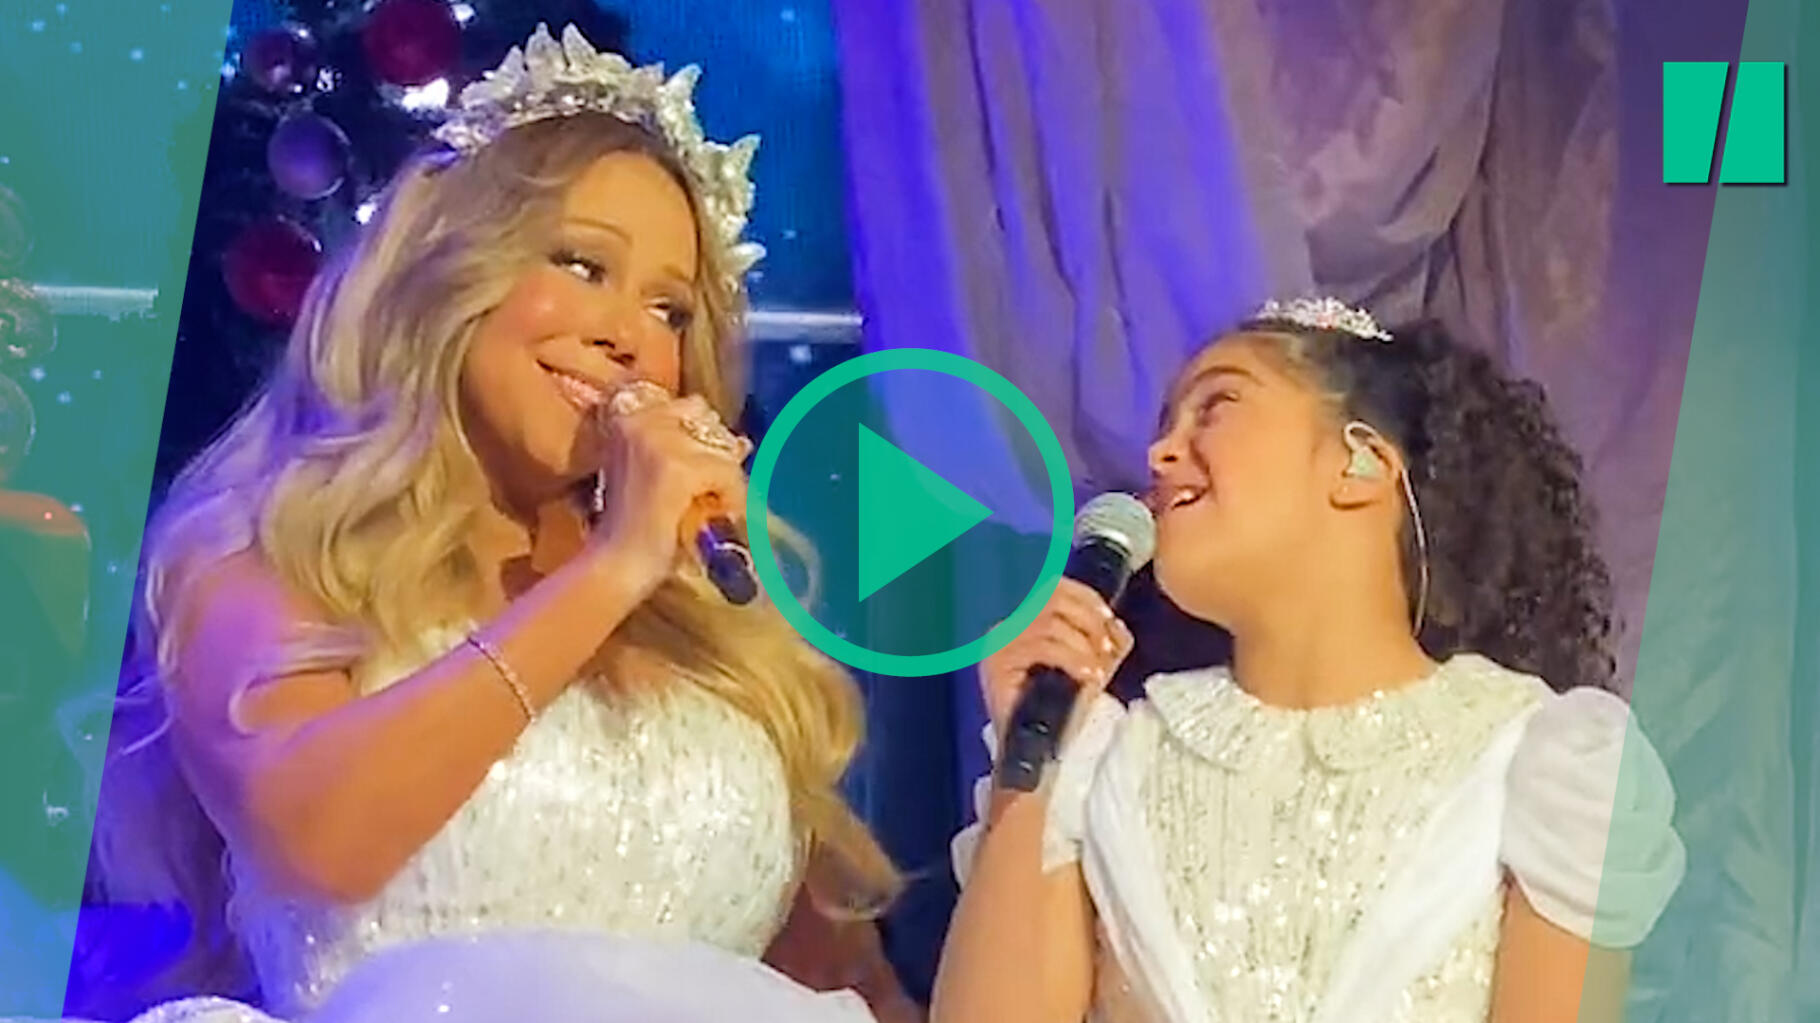 Mariah Carey sings a duet with her daughter Monroe in Toronto for Christmas